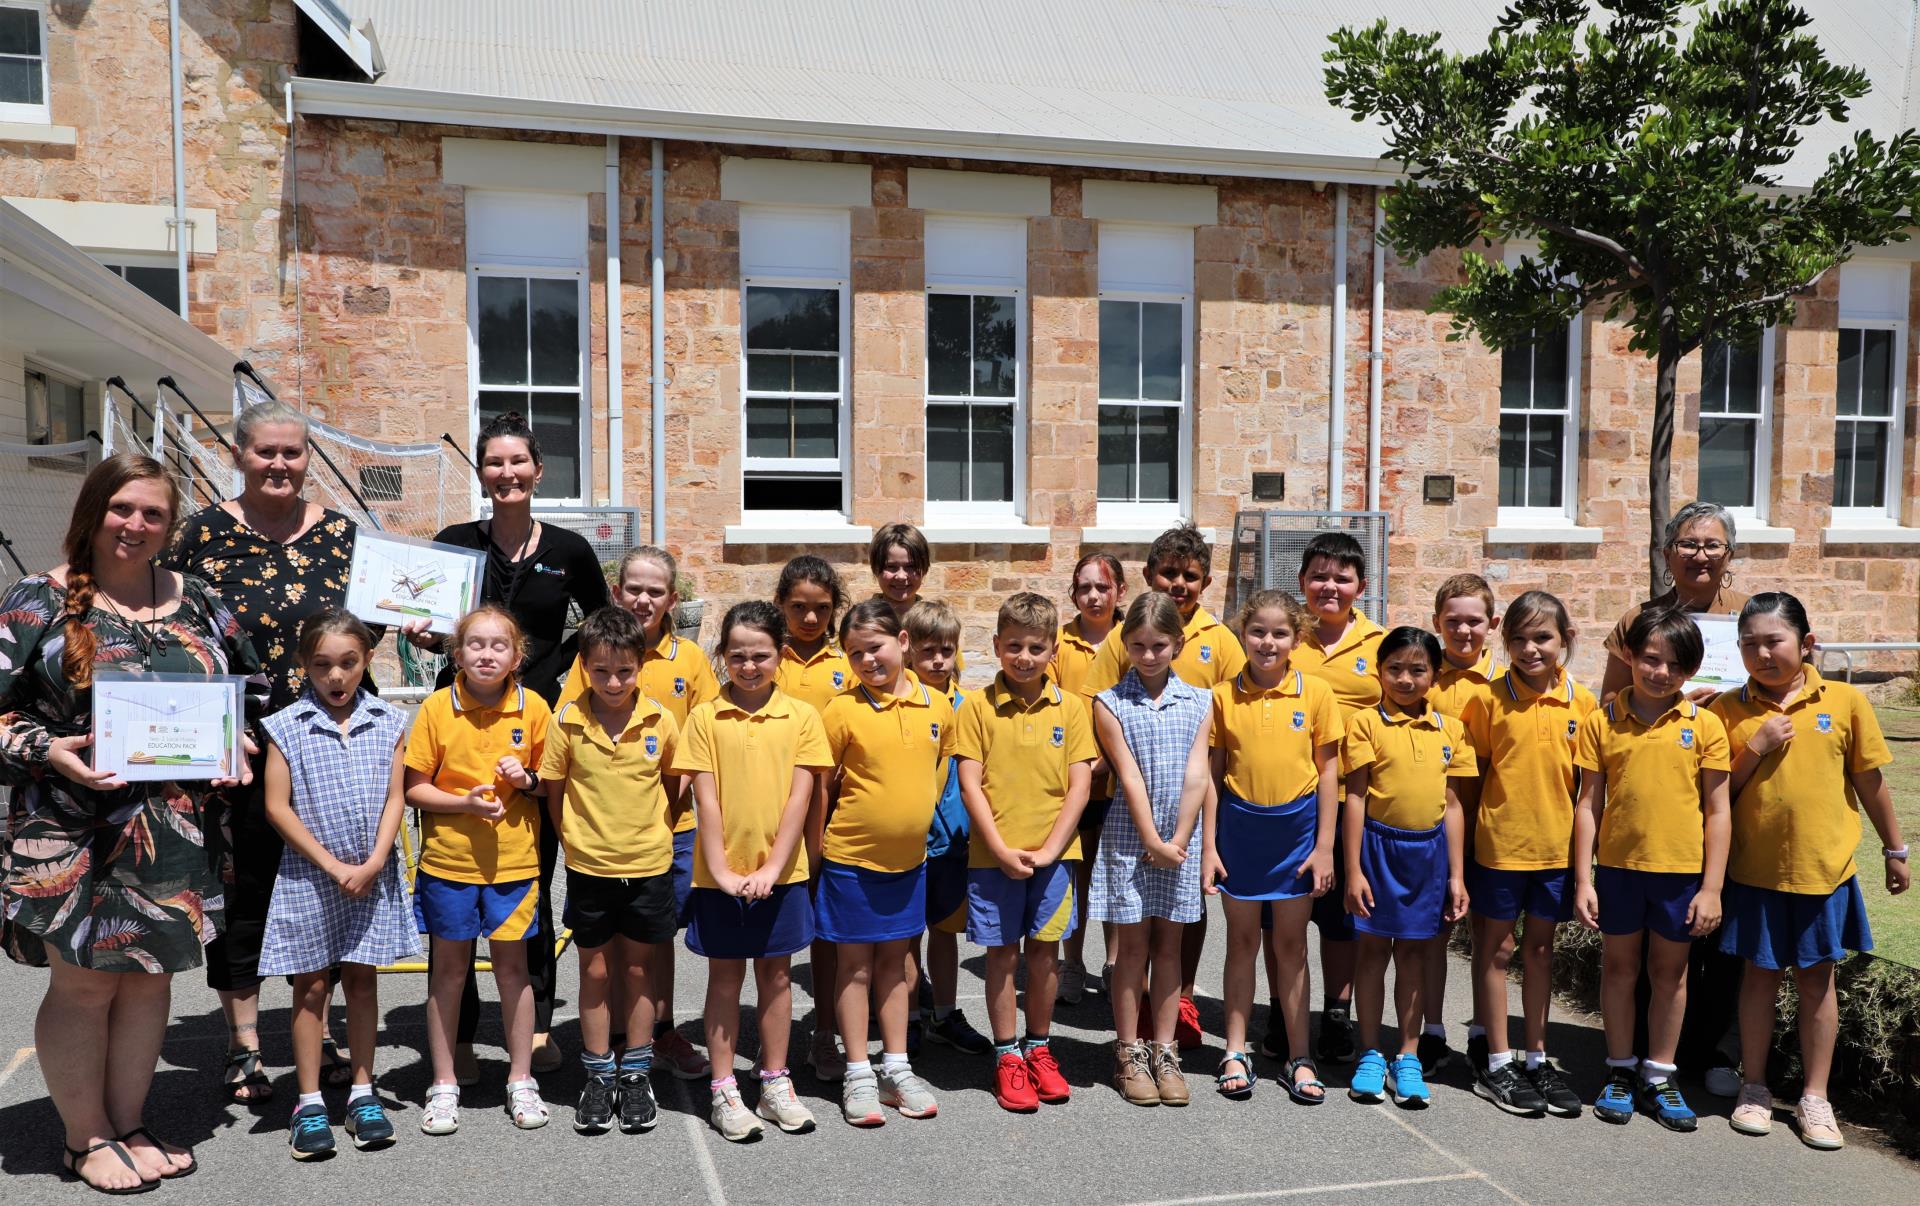 Local history within easy reach for Geraldton youngsters